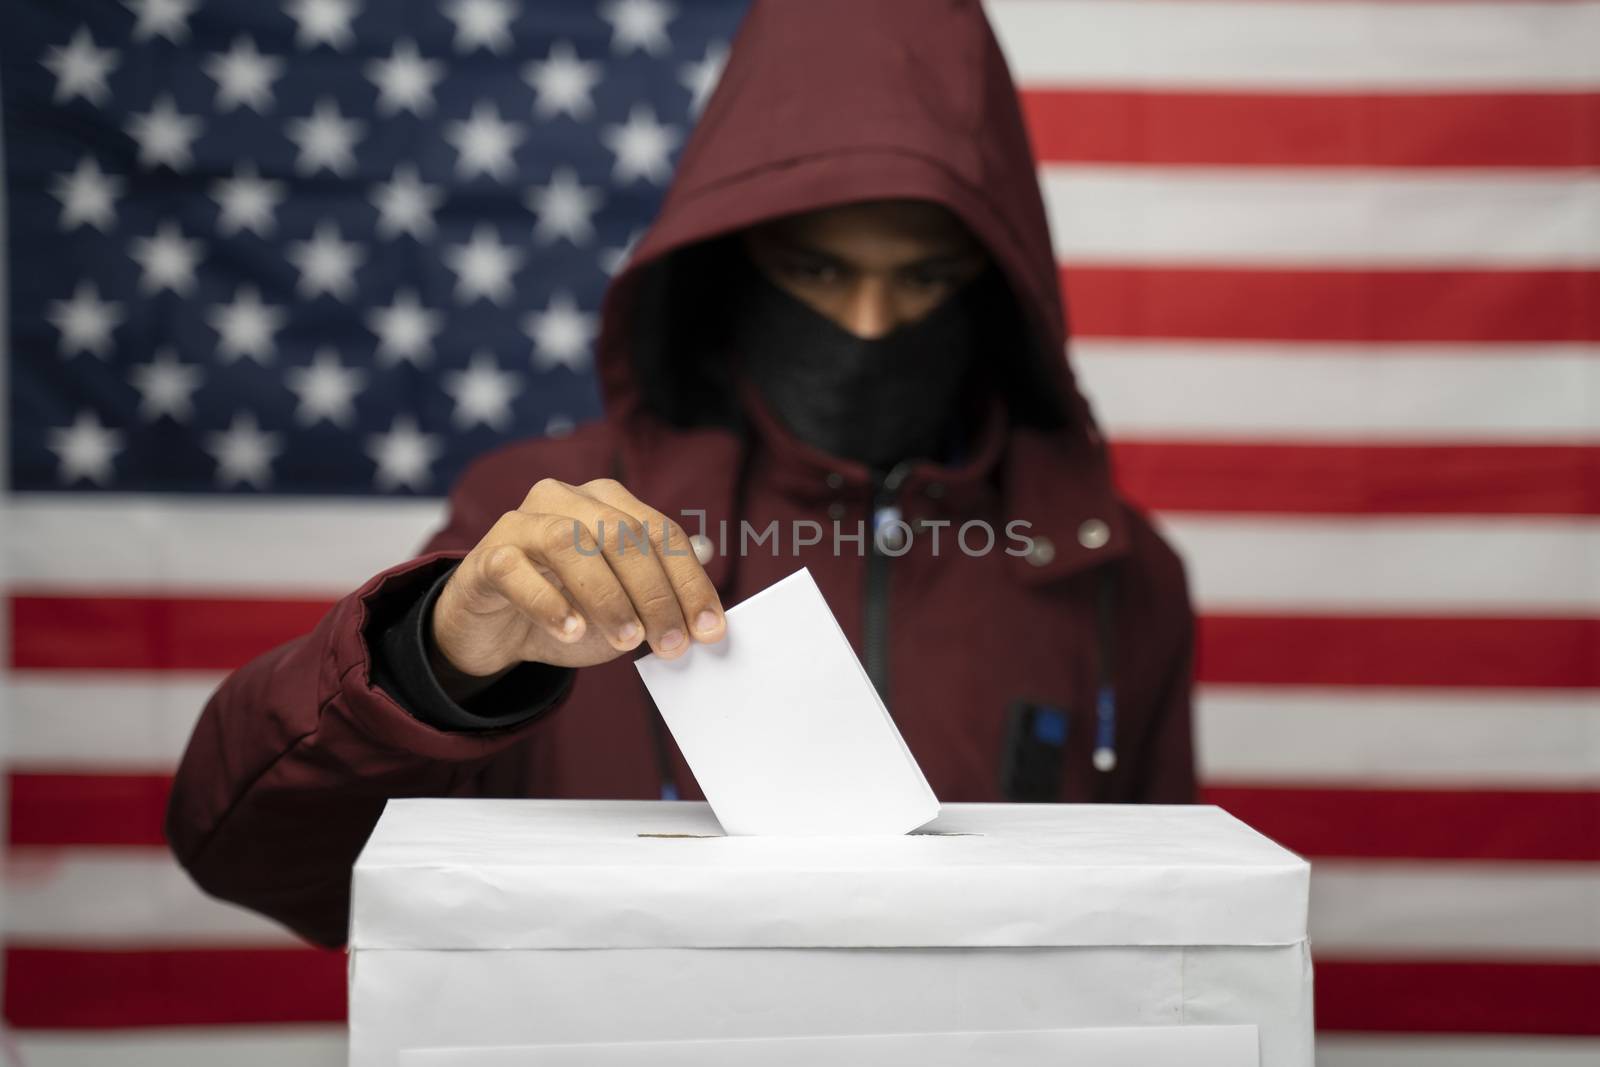 Man in hoodie with face covered casting Vote at polling booth with US falg as background - Concept of unkonwn voting or vote rigging in US elections by lakshmiprasad.maski@gmai.com